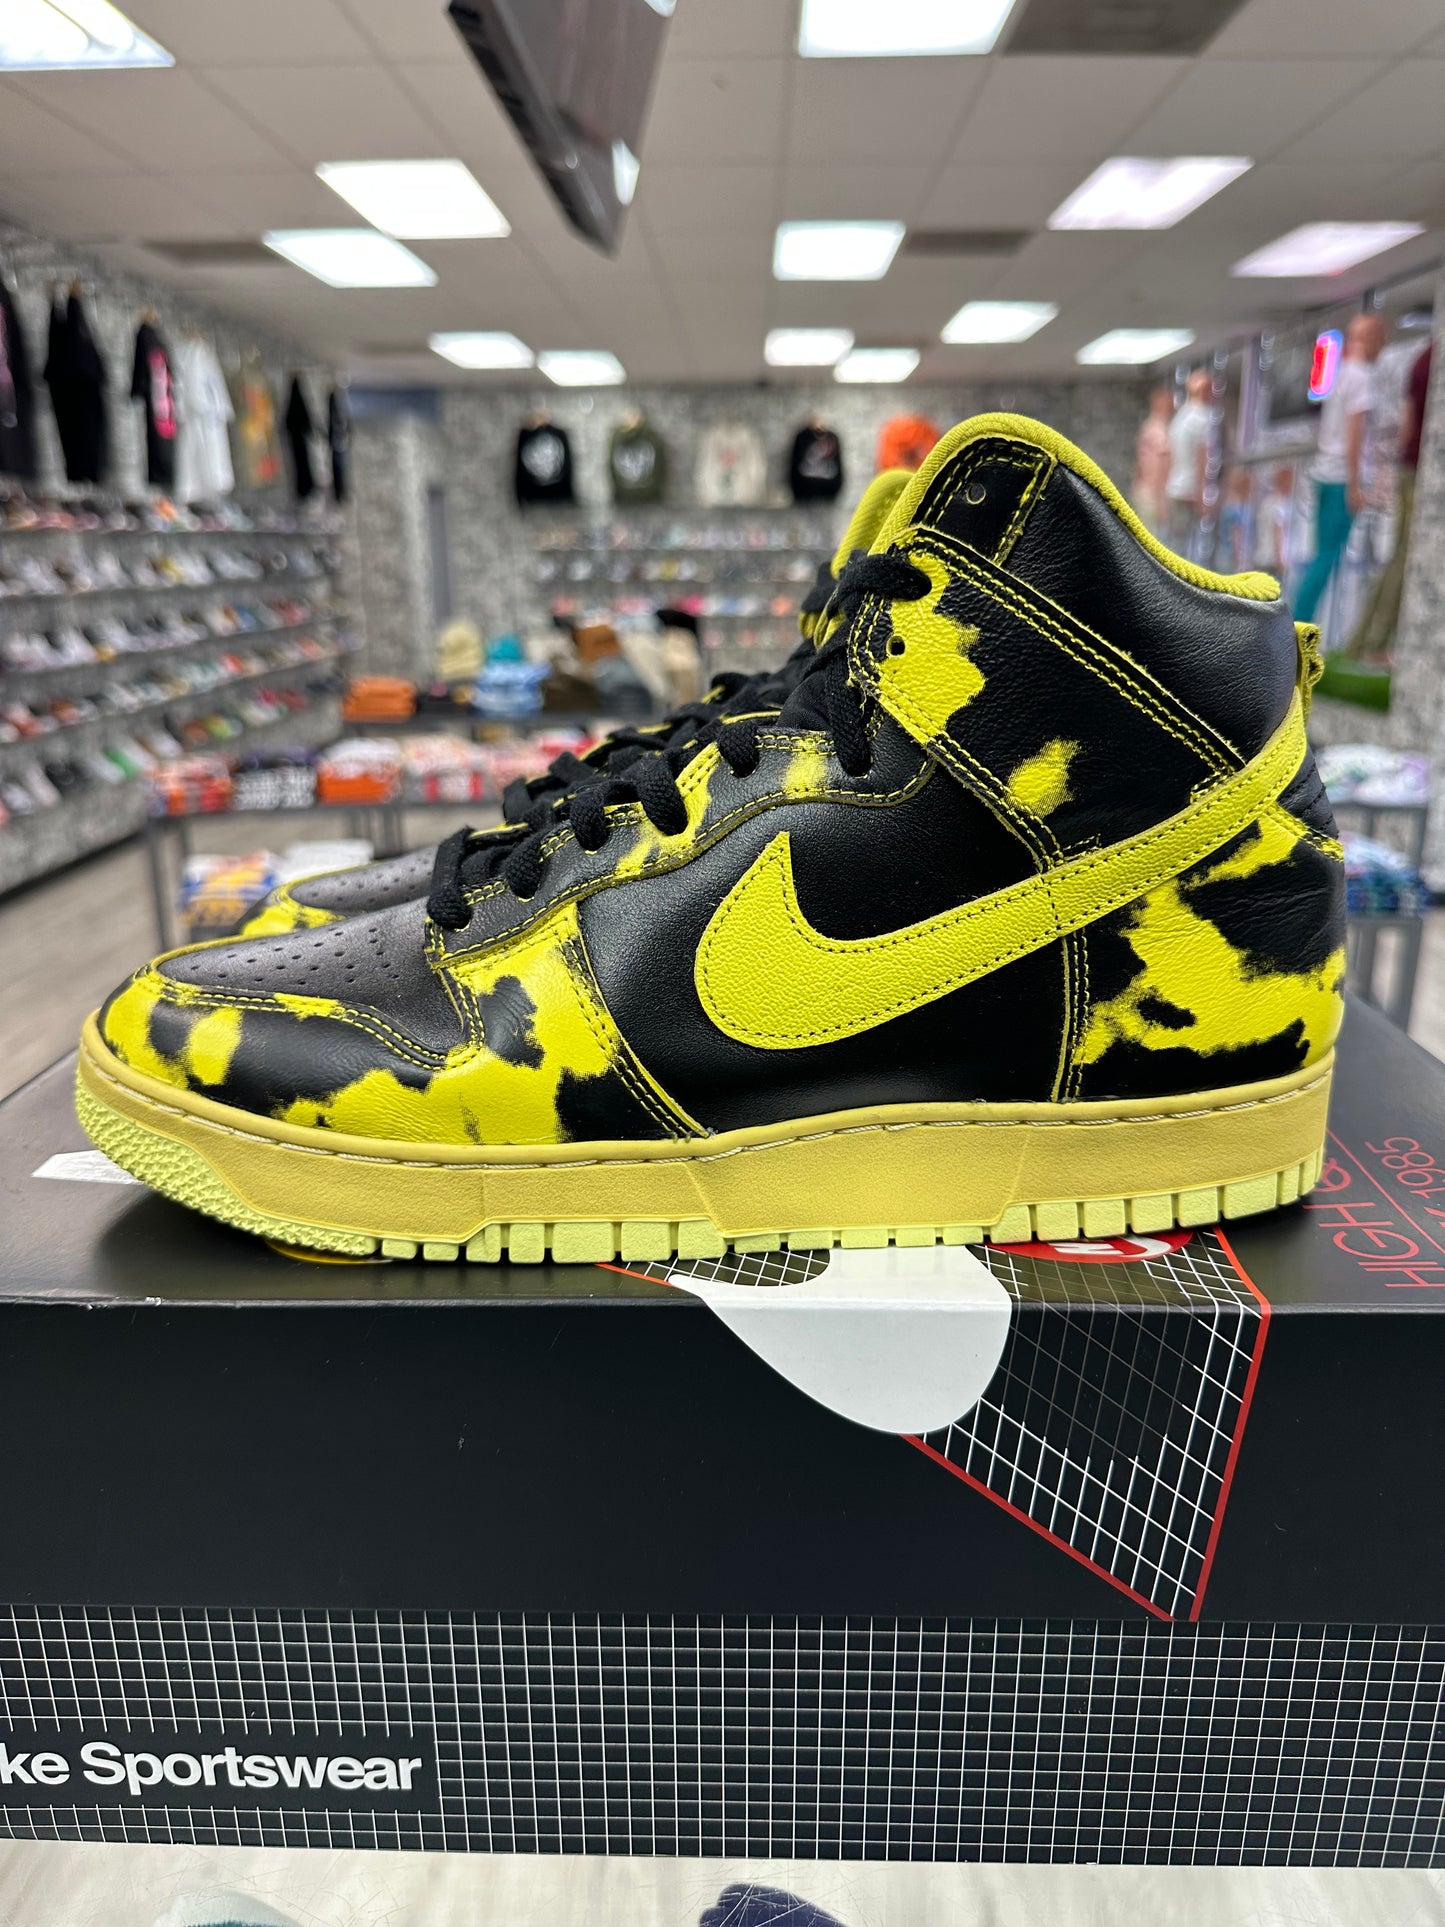 Nike Dunk High 1985 "Yellow Acid Wash" Size 10.5 *Preowned*